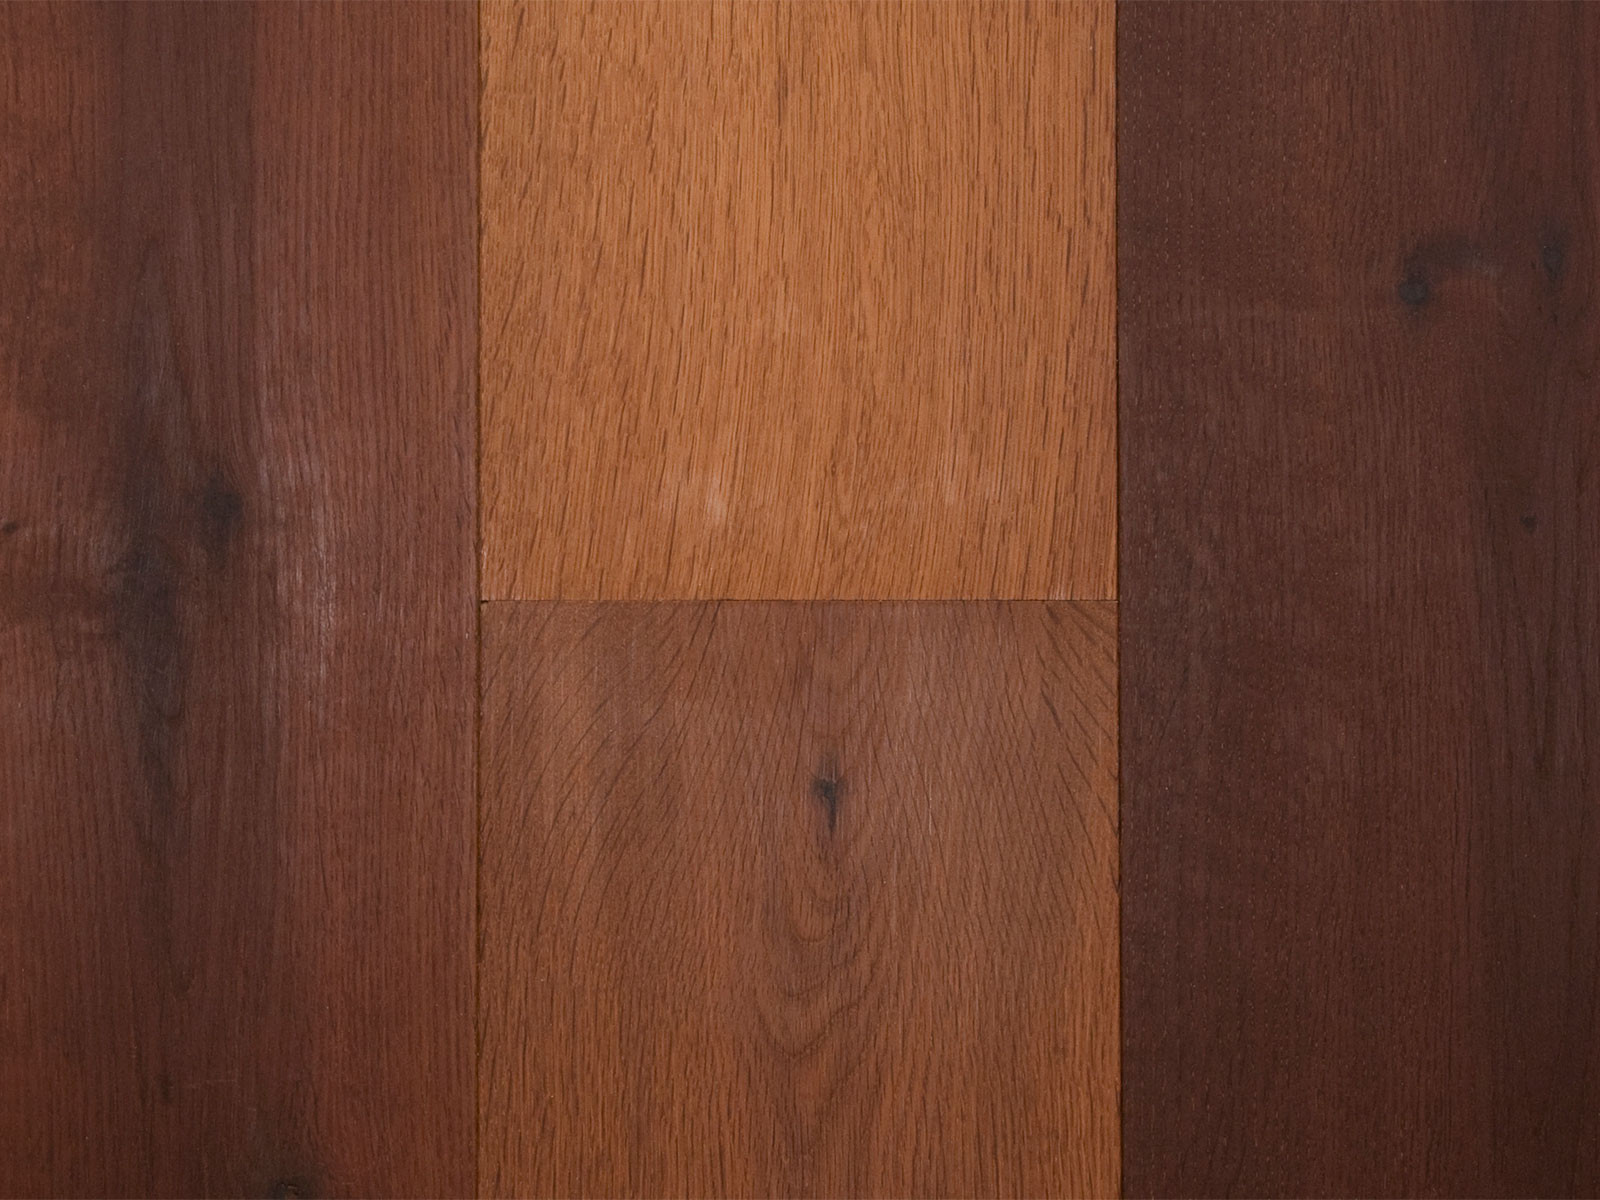 17 Recommended 5 8 Hardwood Flooring 2024 free download 5 8 hardwood flooring of duchateau hardwood flooring houston tx discount engineered wood pertaining to savoy european oak